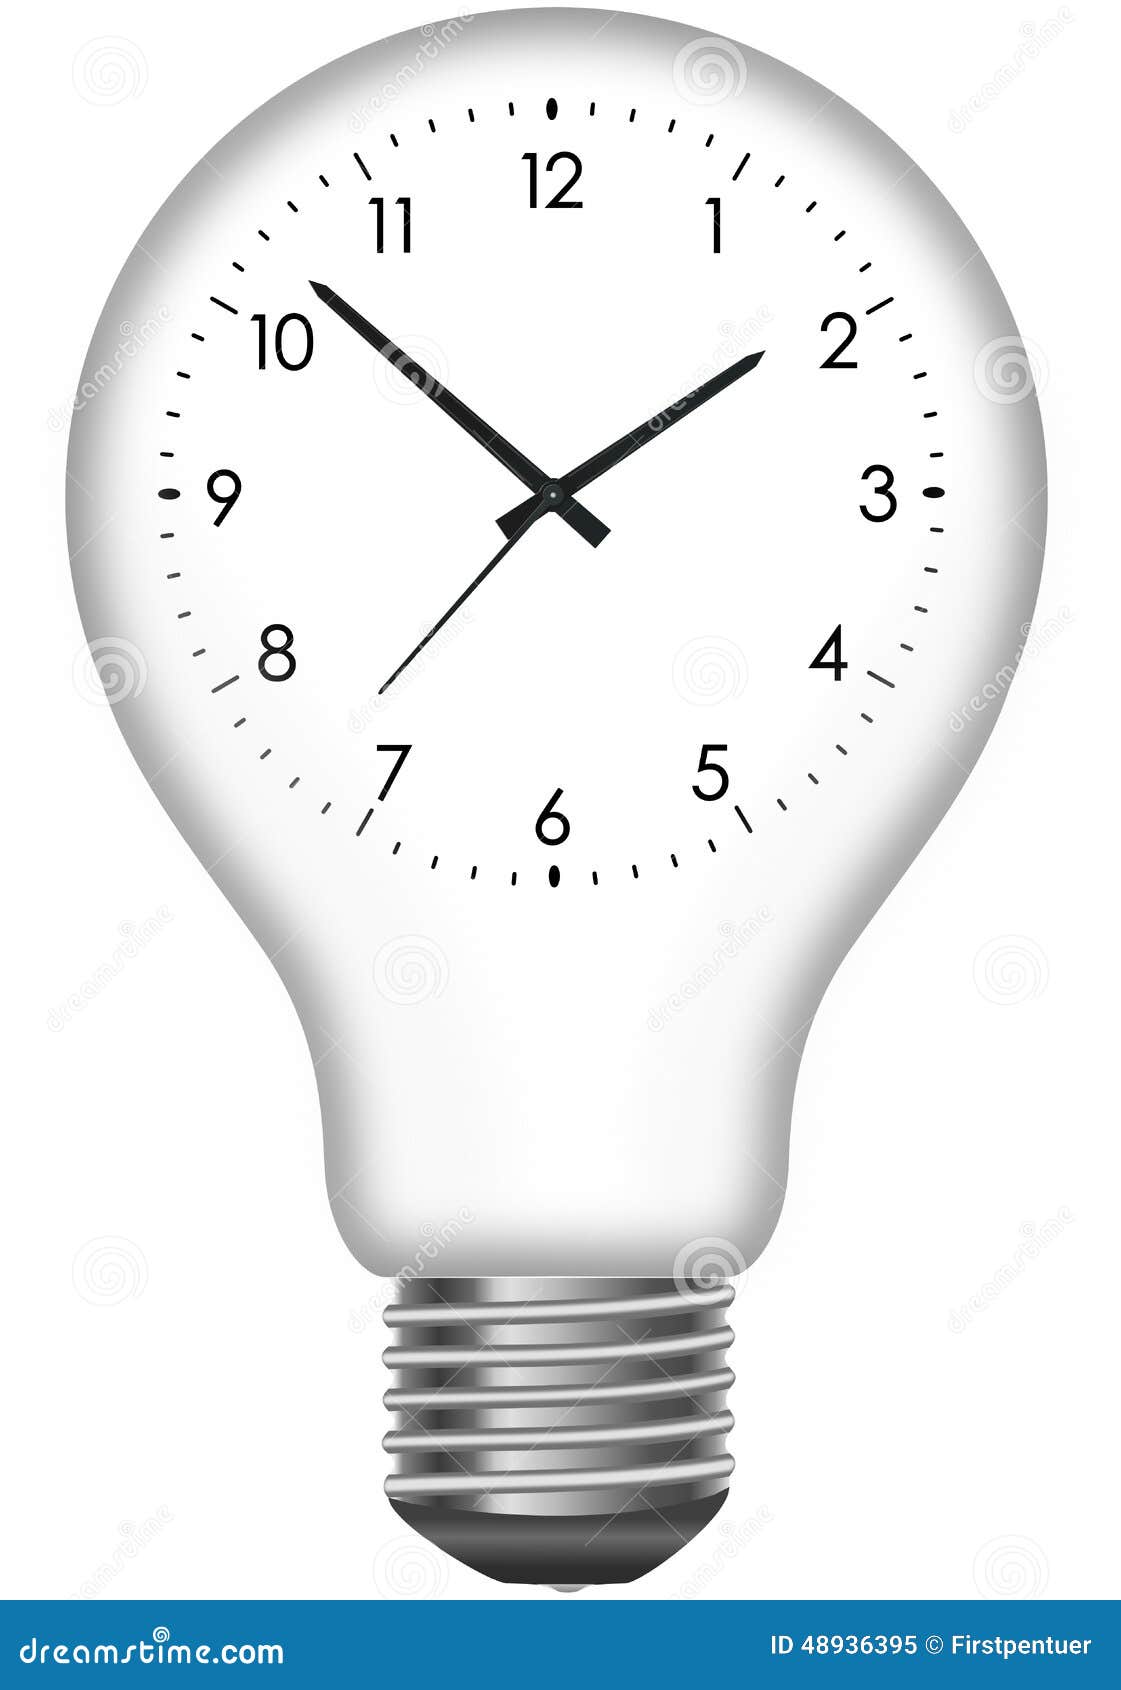 Wall Clock in the Light Bulb Stock Illustration - Illustration of time ...